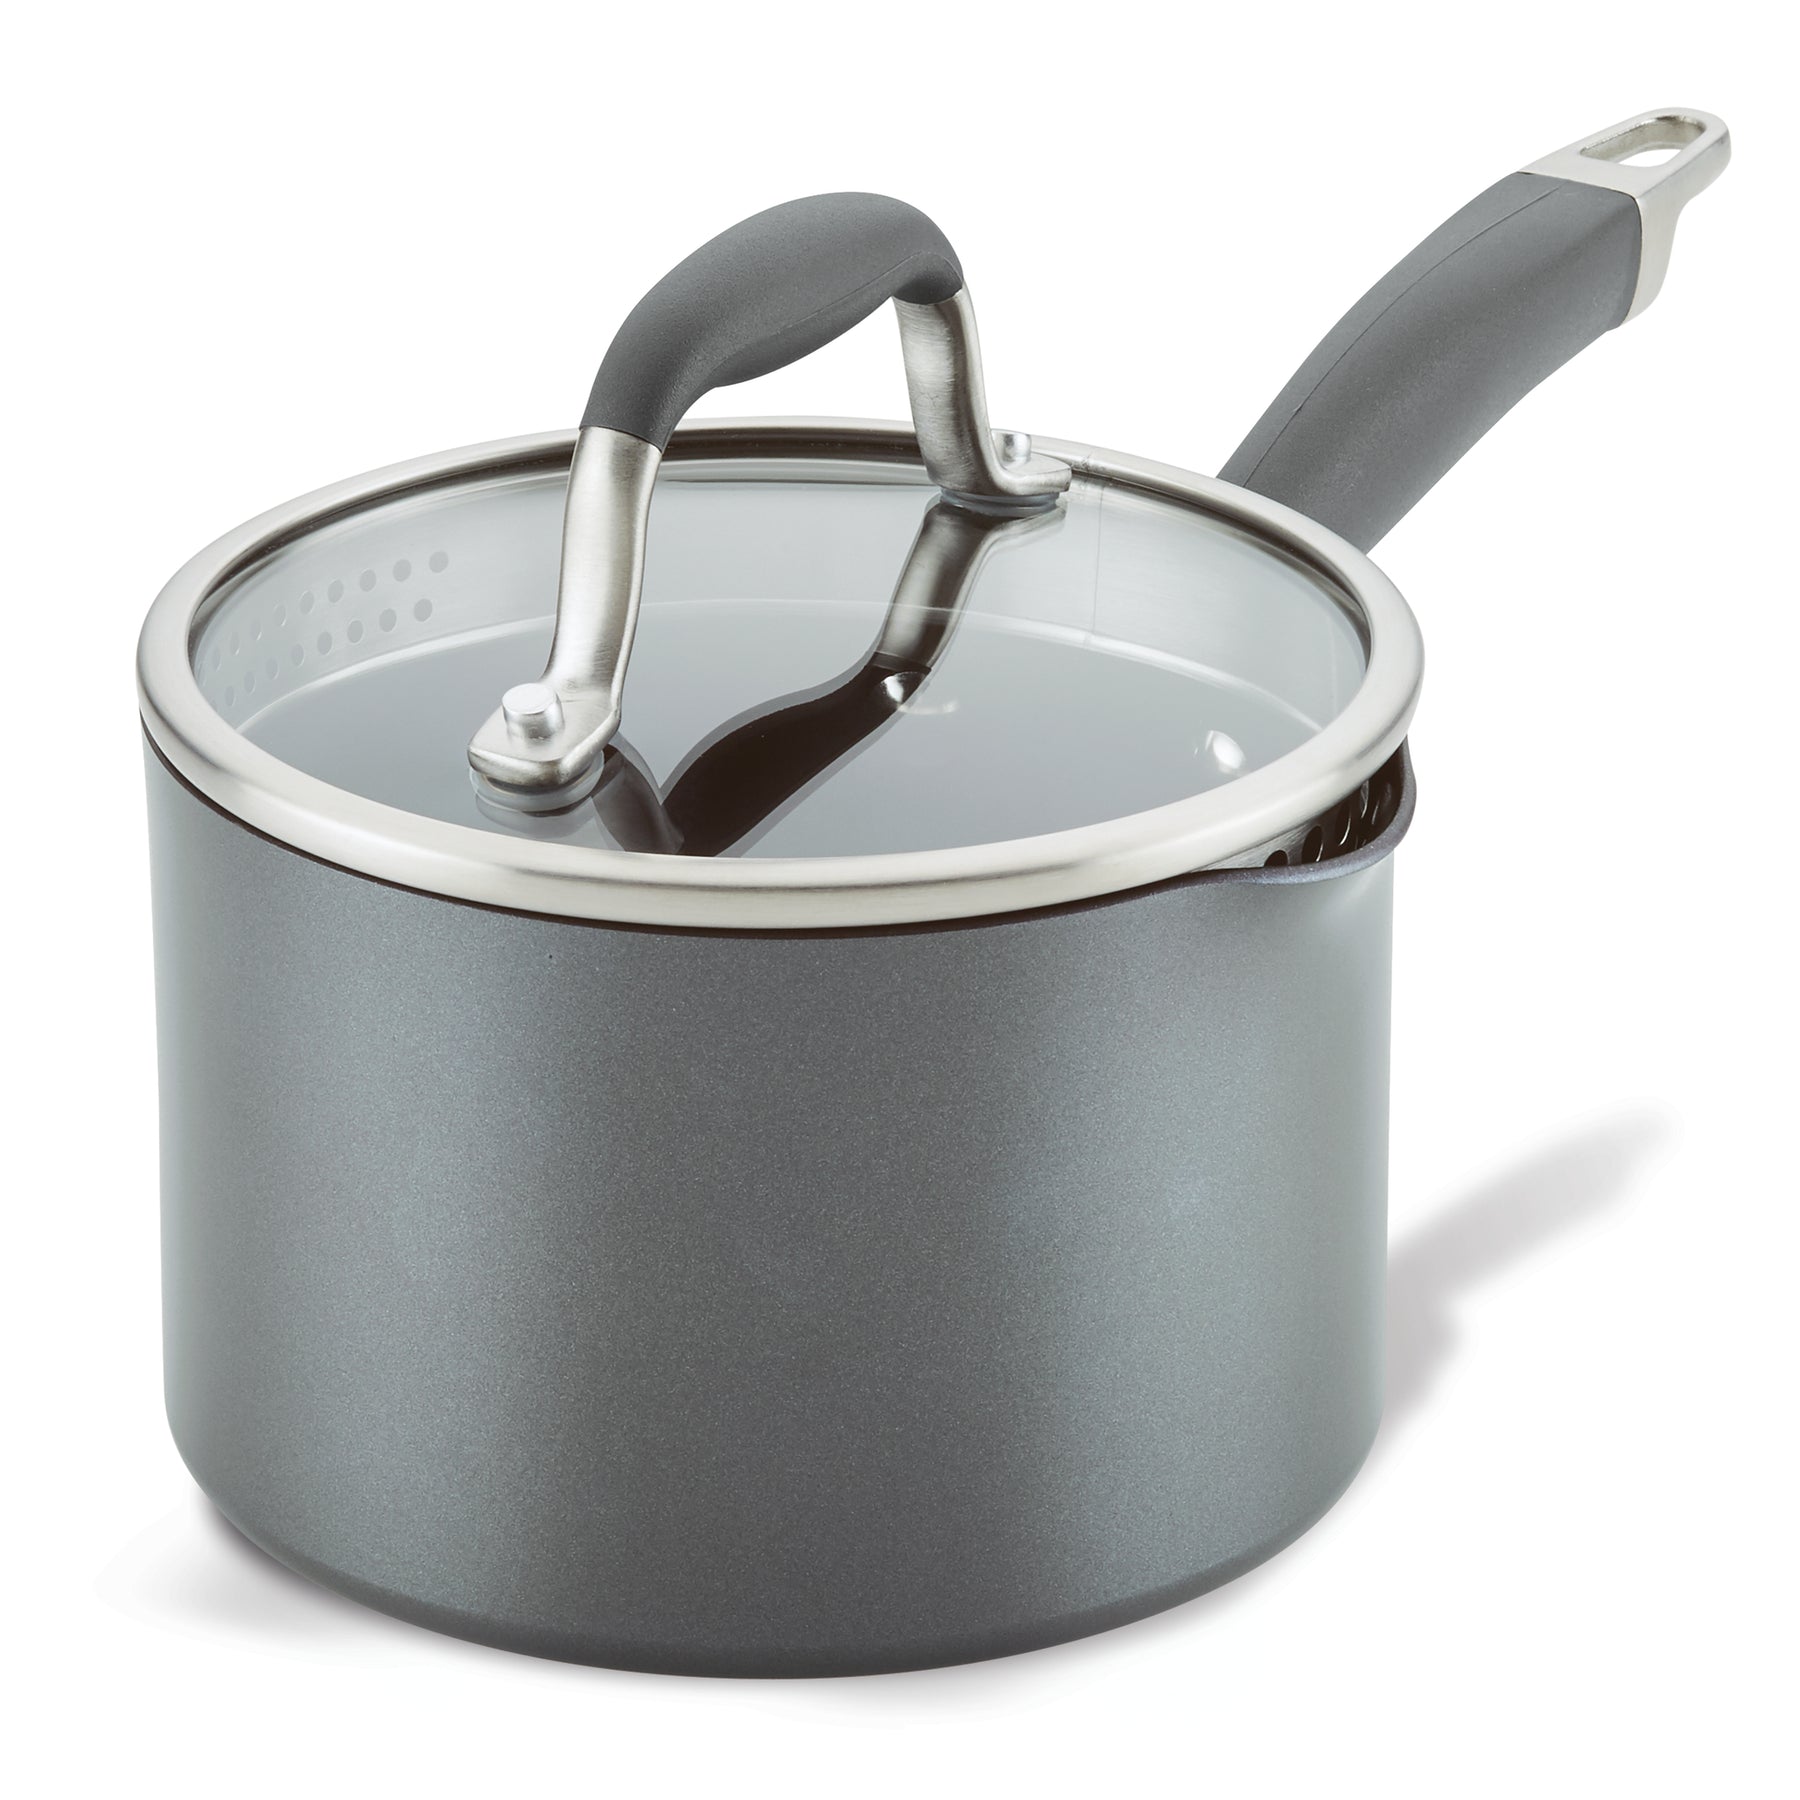 Buy Wholesale China Curved Sauce Pots With Two-layer Non-stick Coating,  With Stainless Steel Handle & Sauce Pots